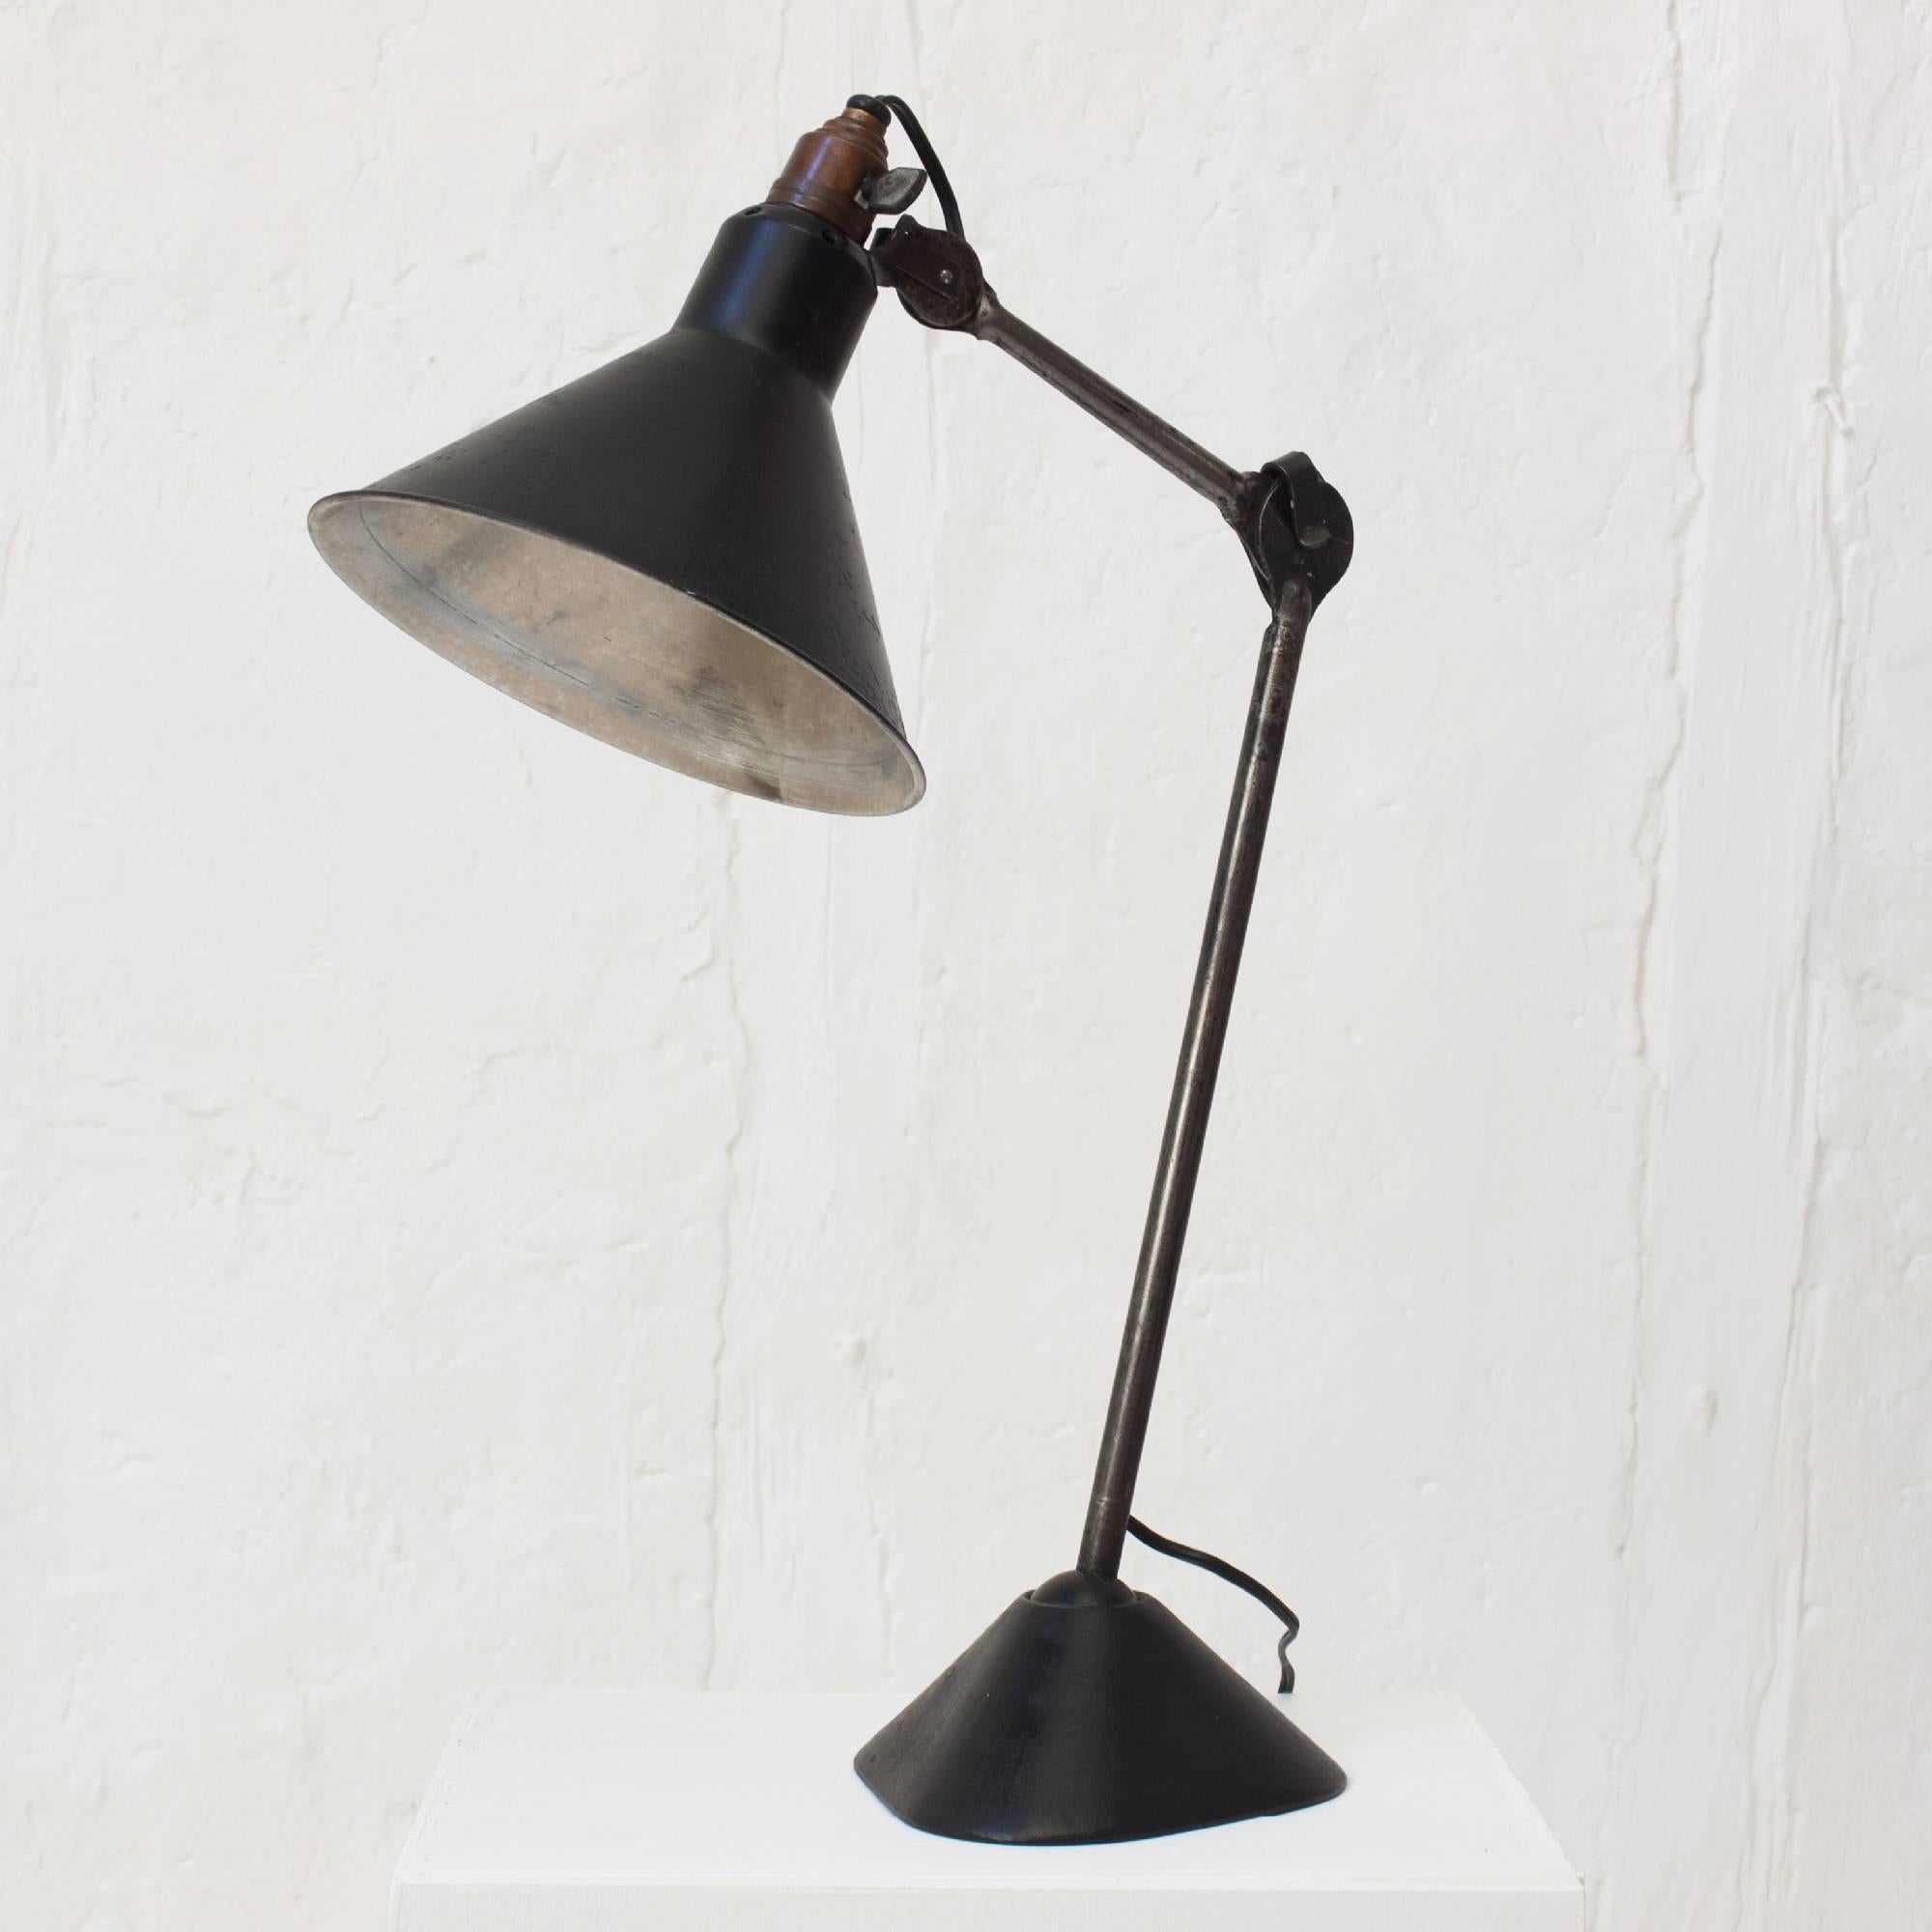 Table lamp designed by Bernard-Albin Gras with drawer shade. First edition.
The Lampe Gras were selected by Le Corbusier in his studio and its projects.